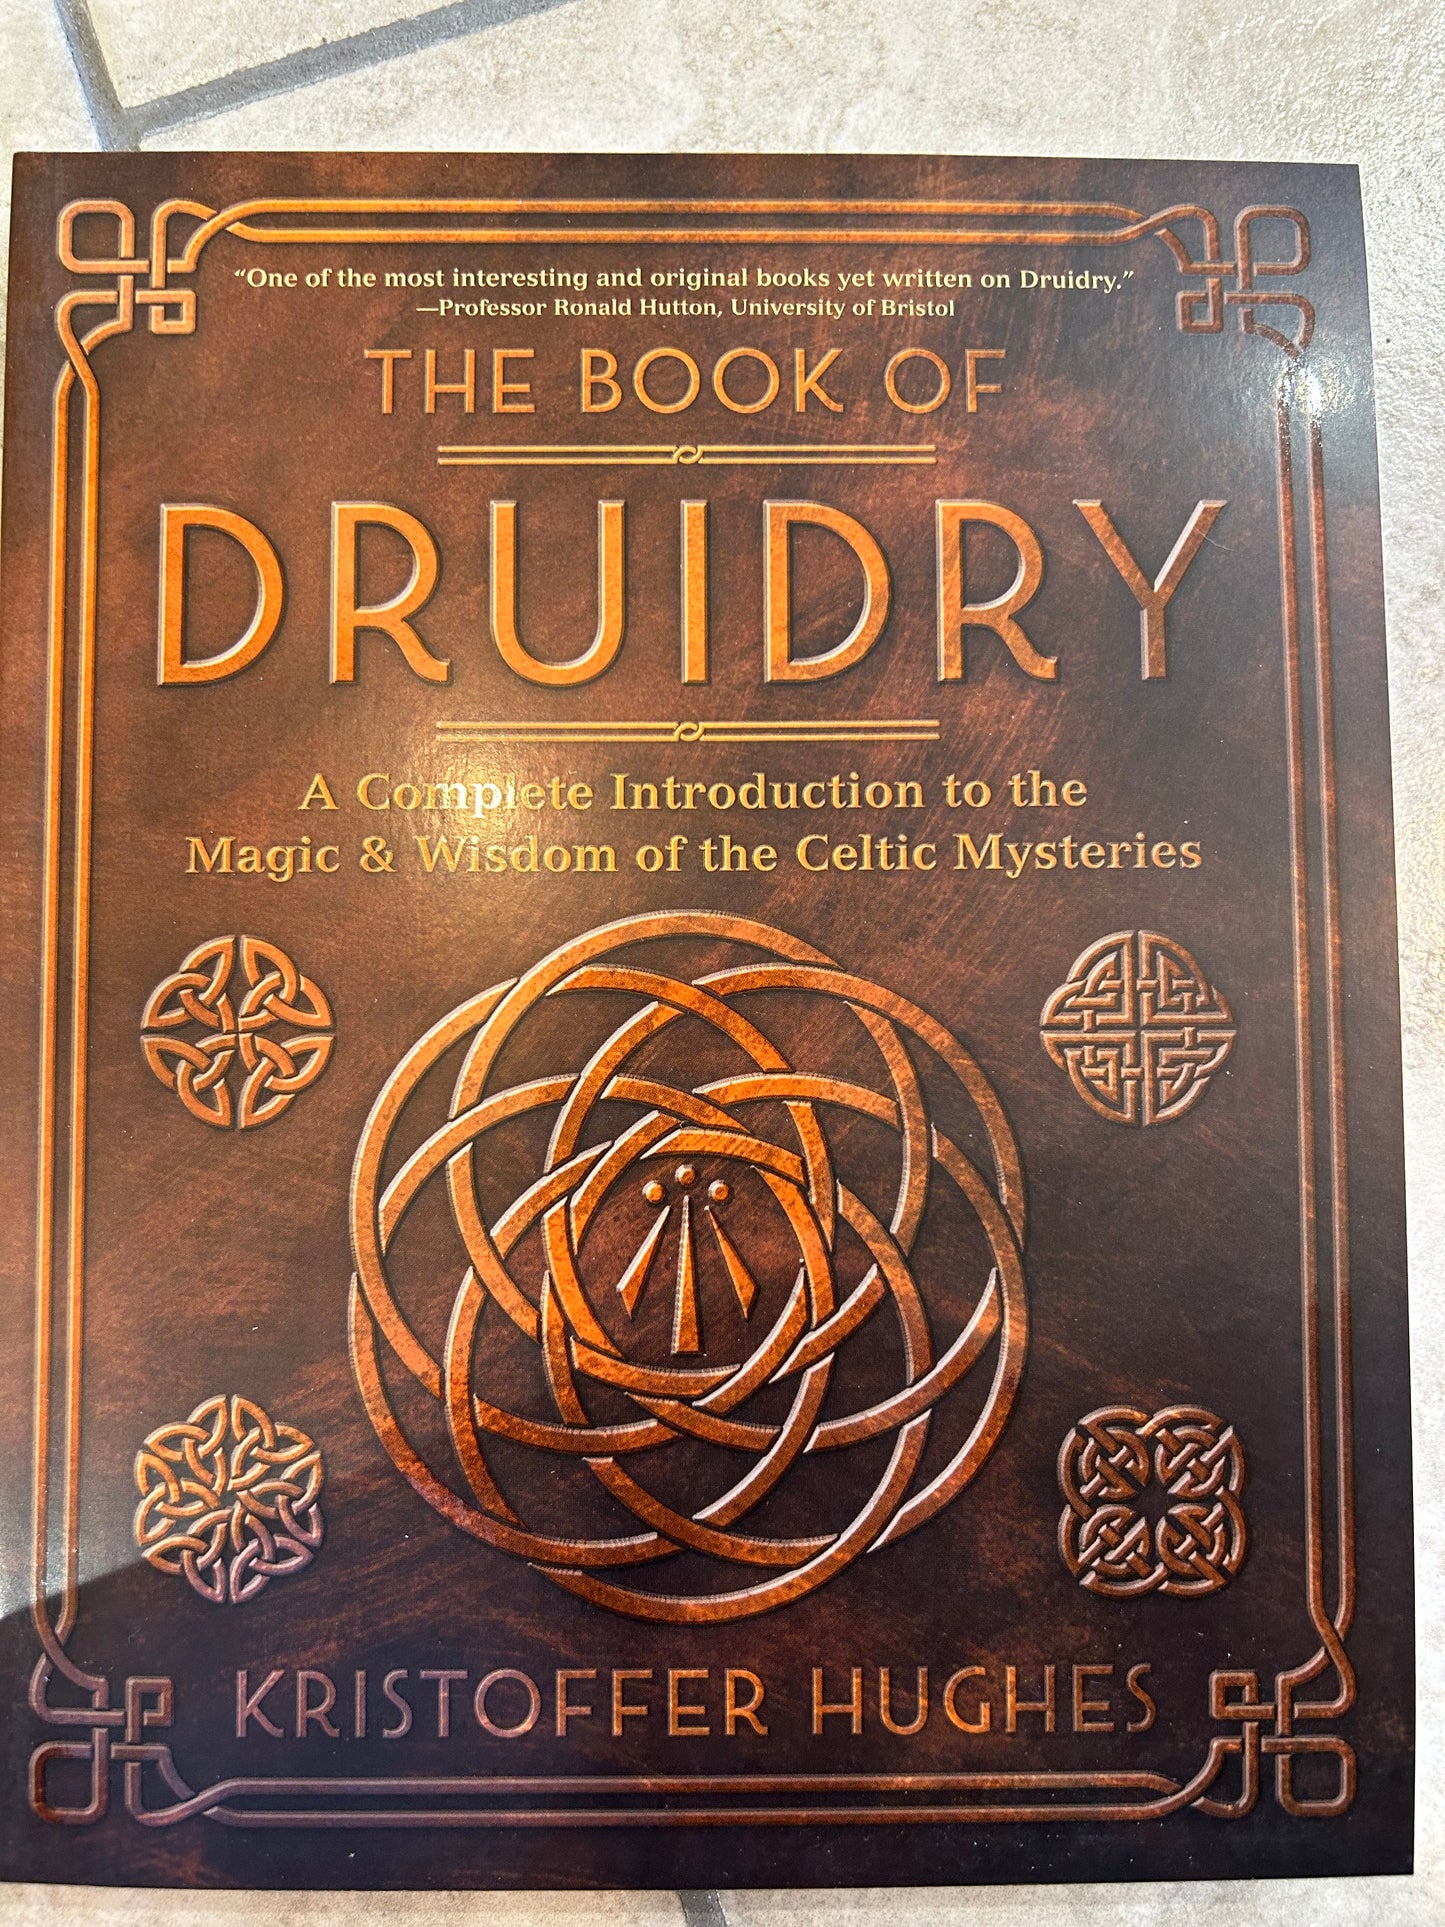 the Book of Druidry by Kristoffer Hughes